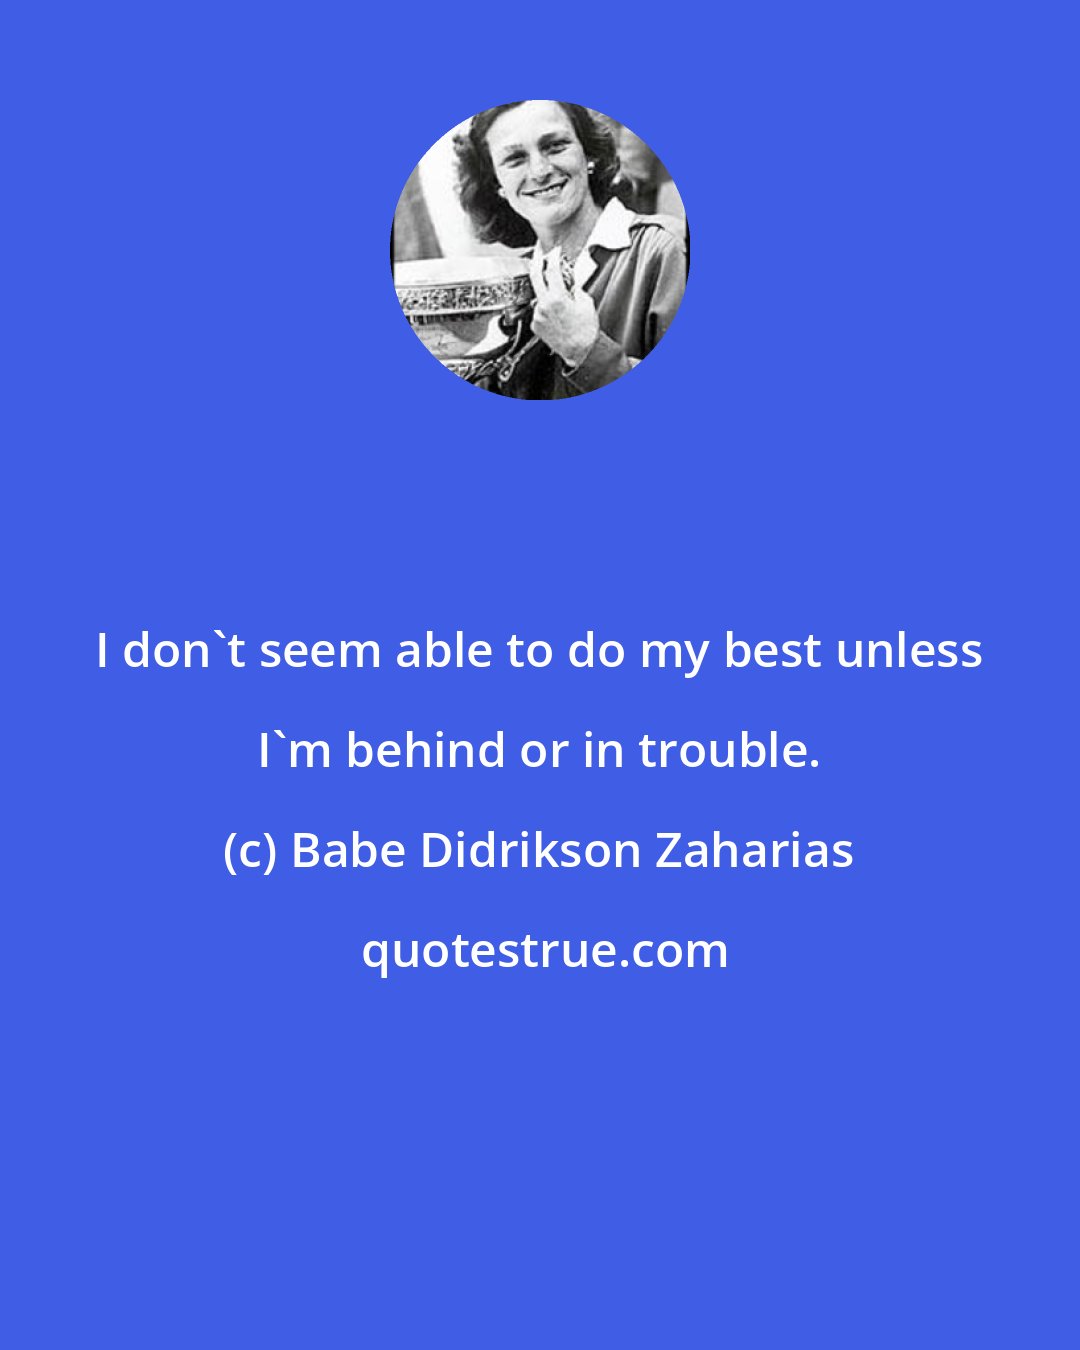 Babe Didrikson Zaharias: I don't seem able to do my best unless I'm behind or in trouble.